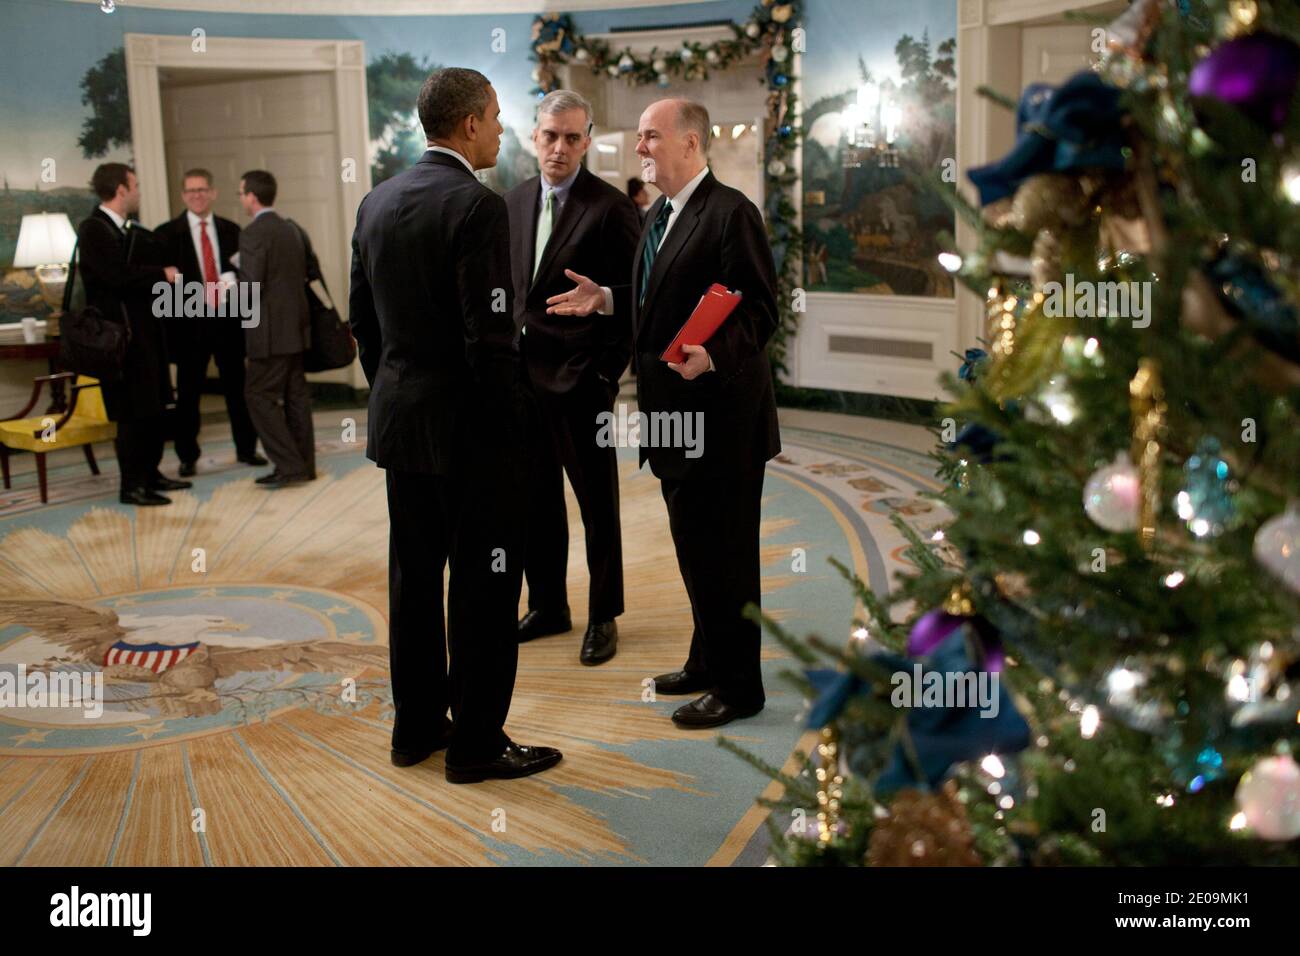 United States President Barack Obama talks with Deputy National Security Advisor Denis McDonough and National Security Advisor Tom Donilon in the Diplomatic Reception Room of the White House before departing for Osawatomie, Kansas, in Washington, D.C., USA on December 6, 2011. Photo by Pete Souza/White House/ABACAPRESS.COM Stock Photo